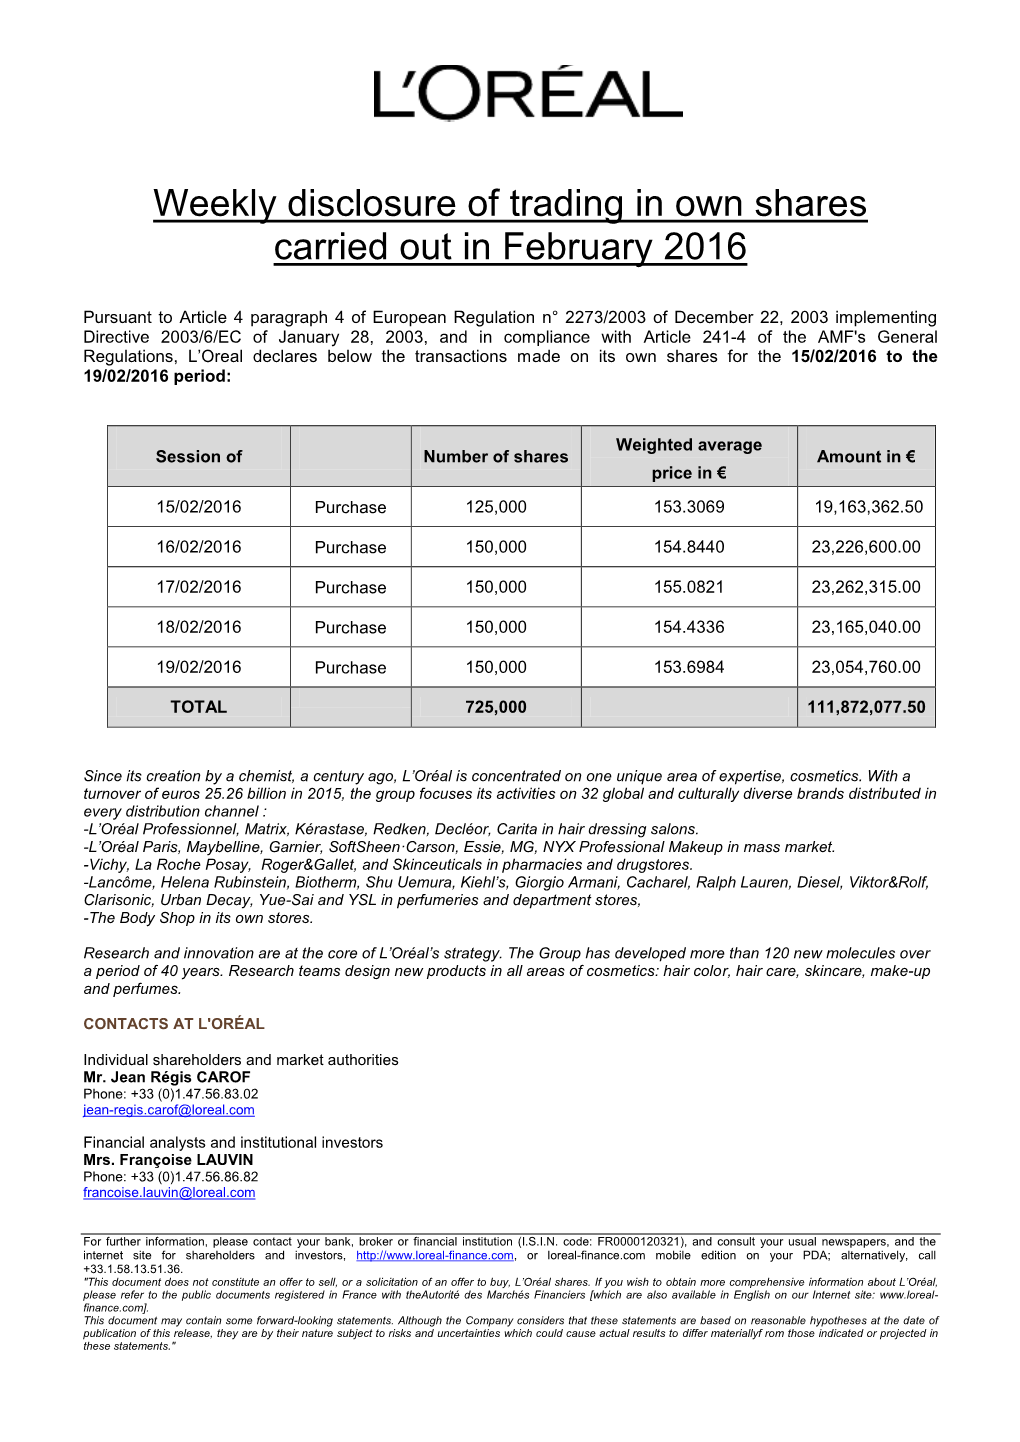 Weekly Disclosure of Trading in Own Shares Carried out in February 2016